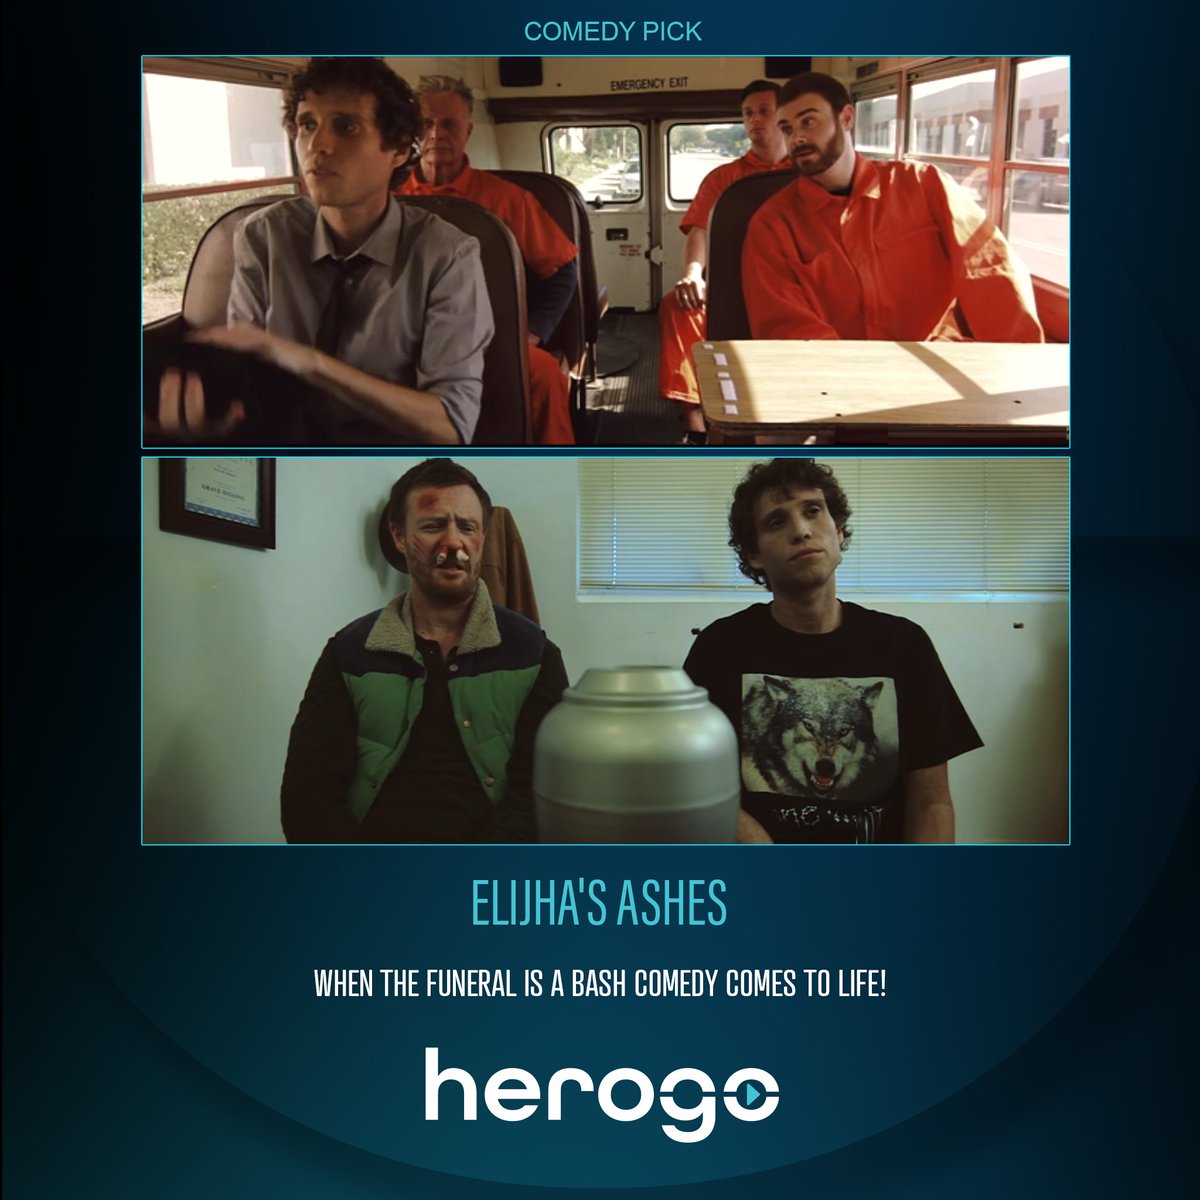 😜 Who says a wake can't be fun? Split sides 😂 with Elijah's Ashes now streaming on HEROGO! 🔥

#comedymovie #moviestowatch #moviestowatchrightnow #comedyfilm #funnymovie #gostream #FreeStreaming #free